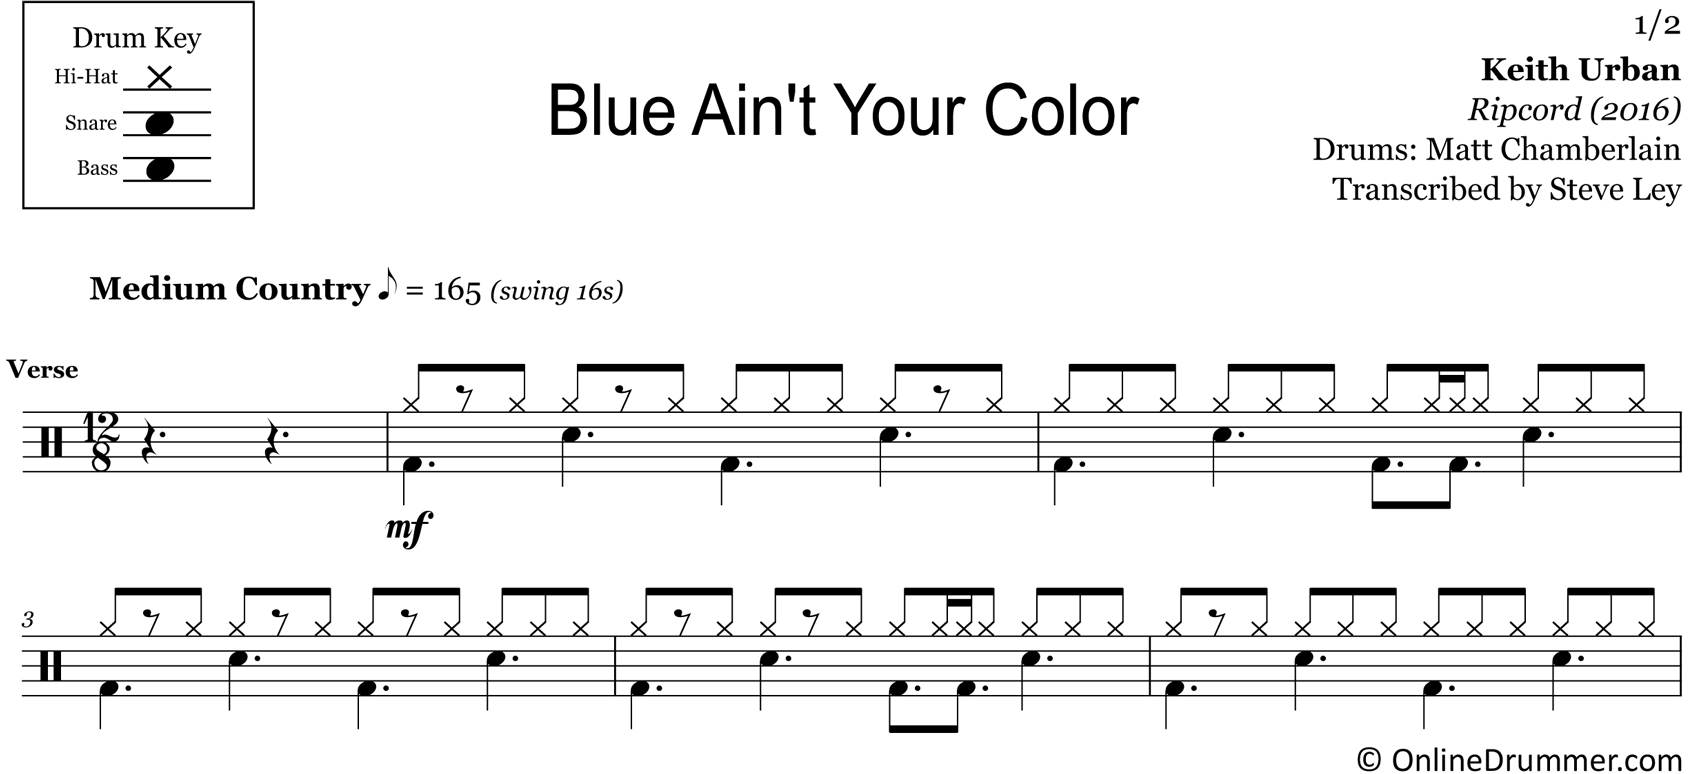 Blue Ain't Your Color - Keith Urban - Drum Sheet Music